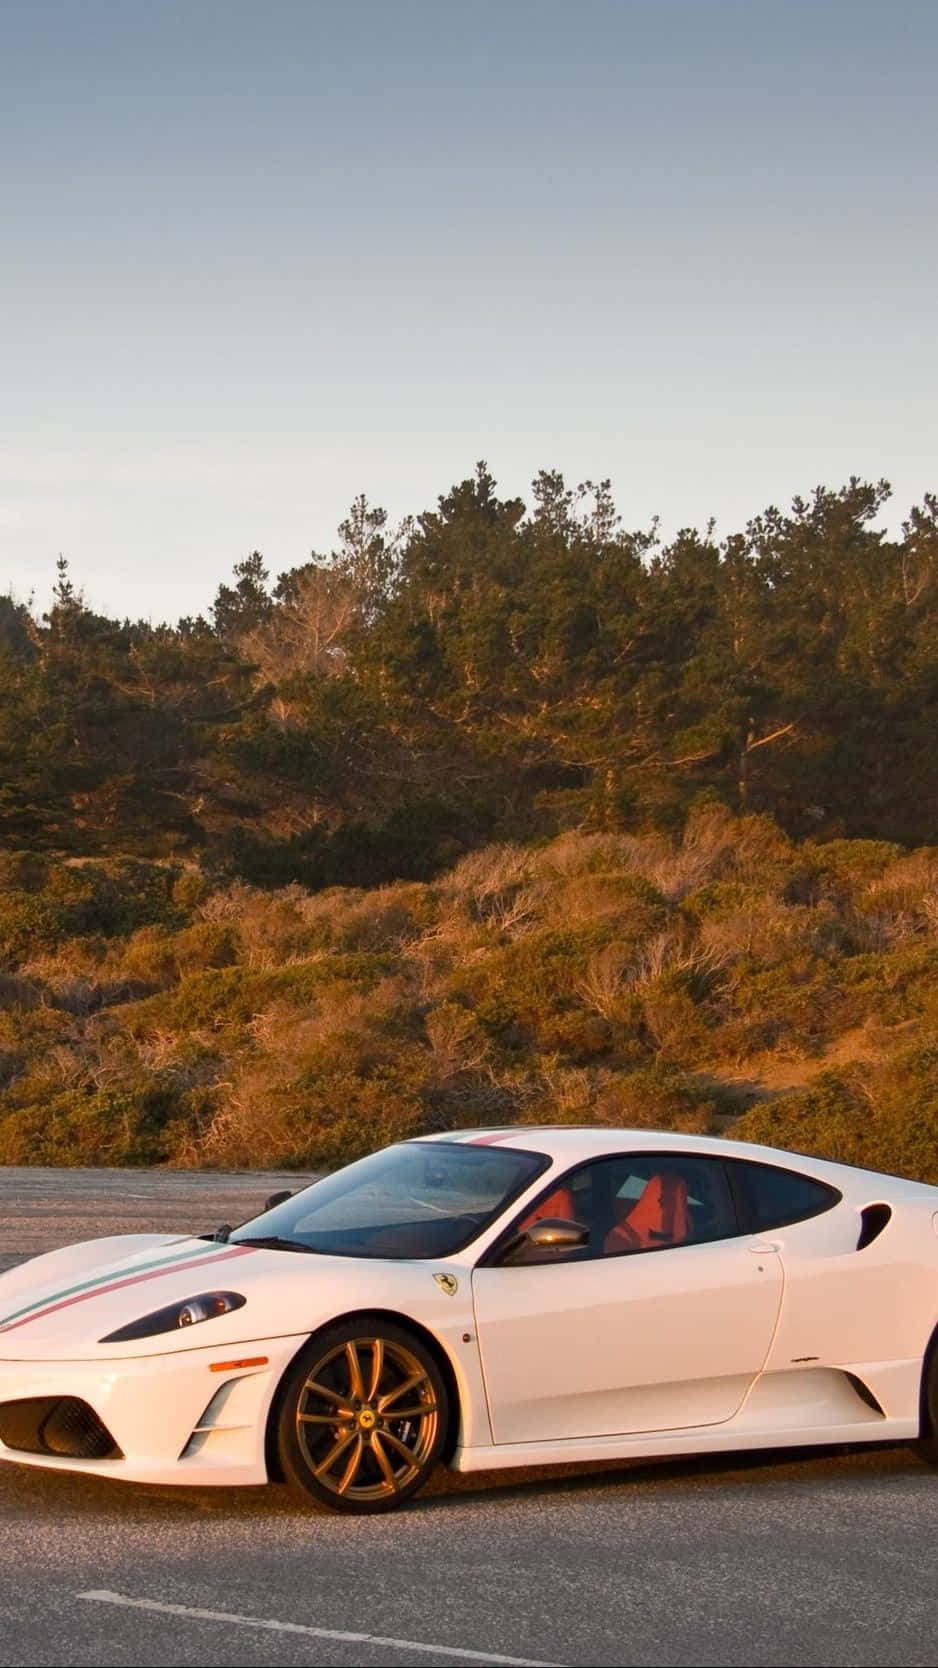 Experience the luxury of a white Ferrari with your smartphone. Wallpaper